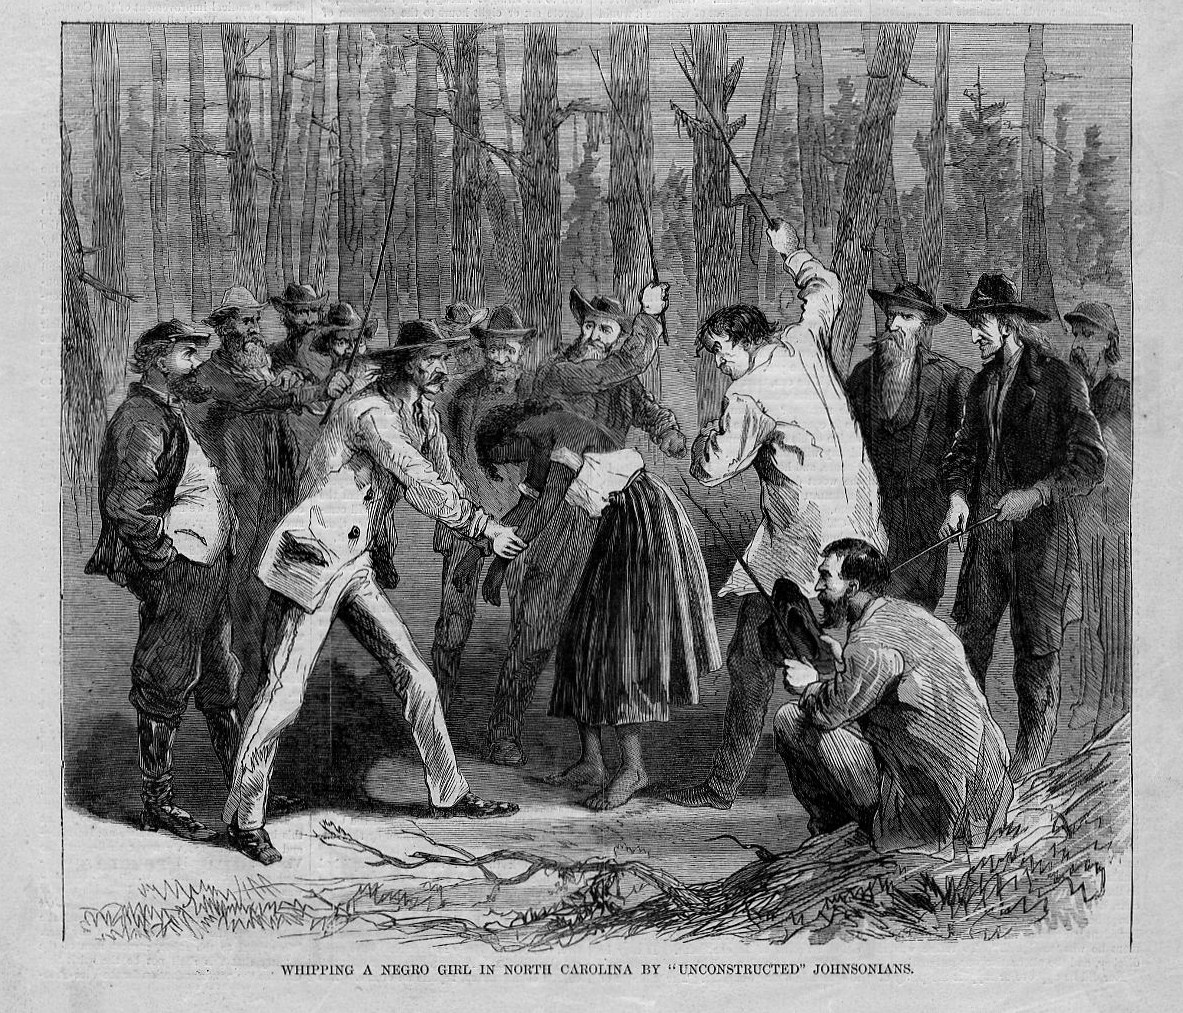 An 1867 depiction of a black woman being whipped in North Carolina.